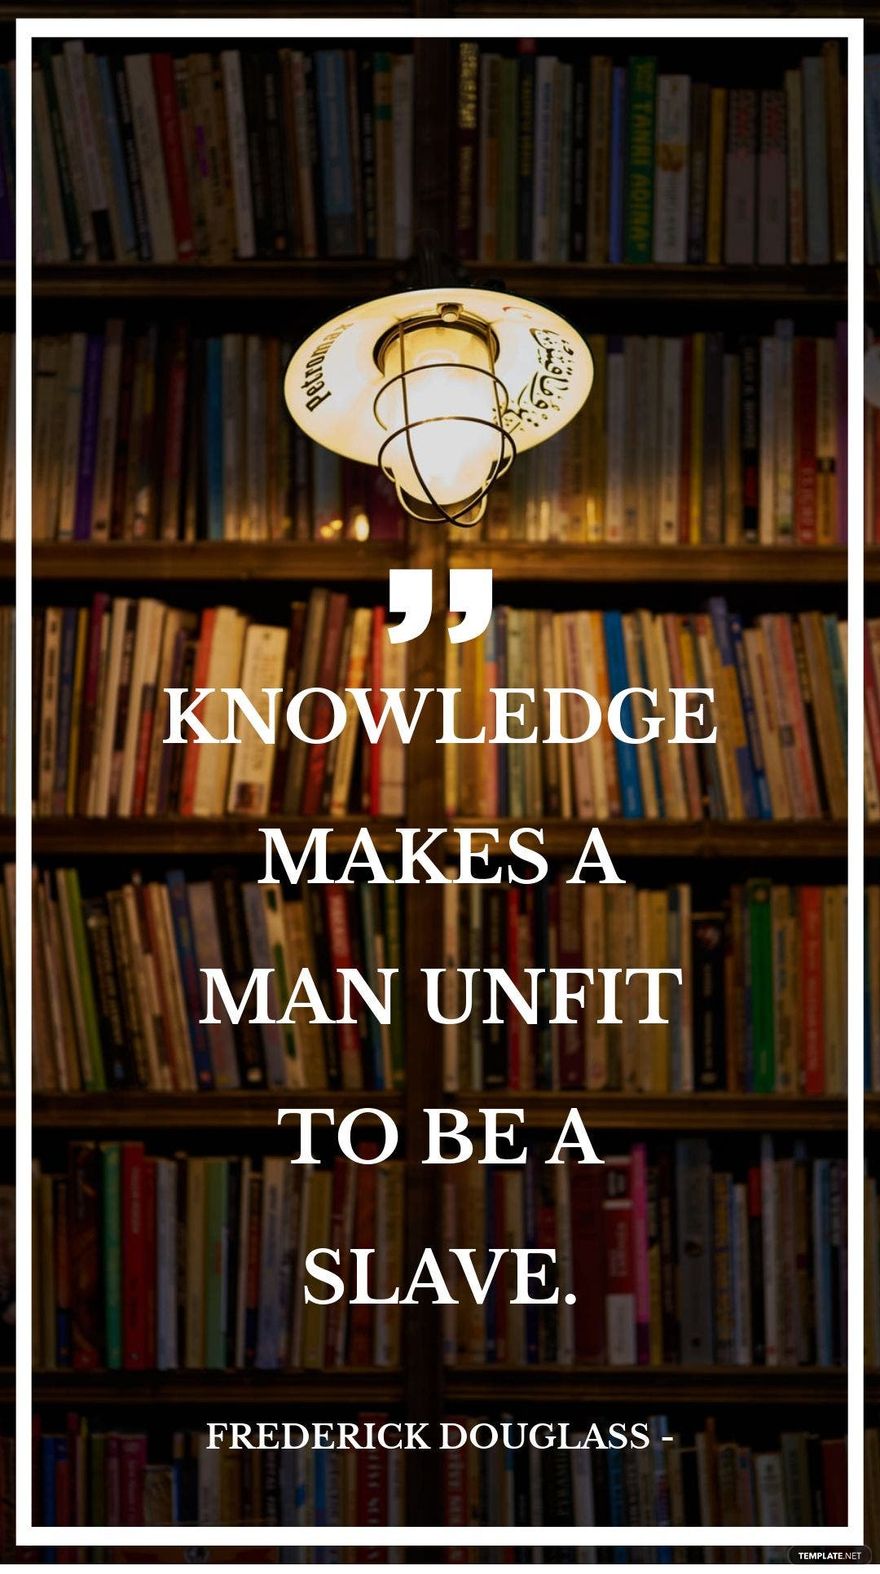 Free Frederick Douglass - Knowledge makes a man unfit to be a slave. in JPG